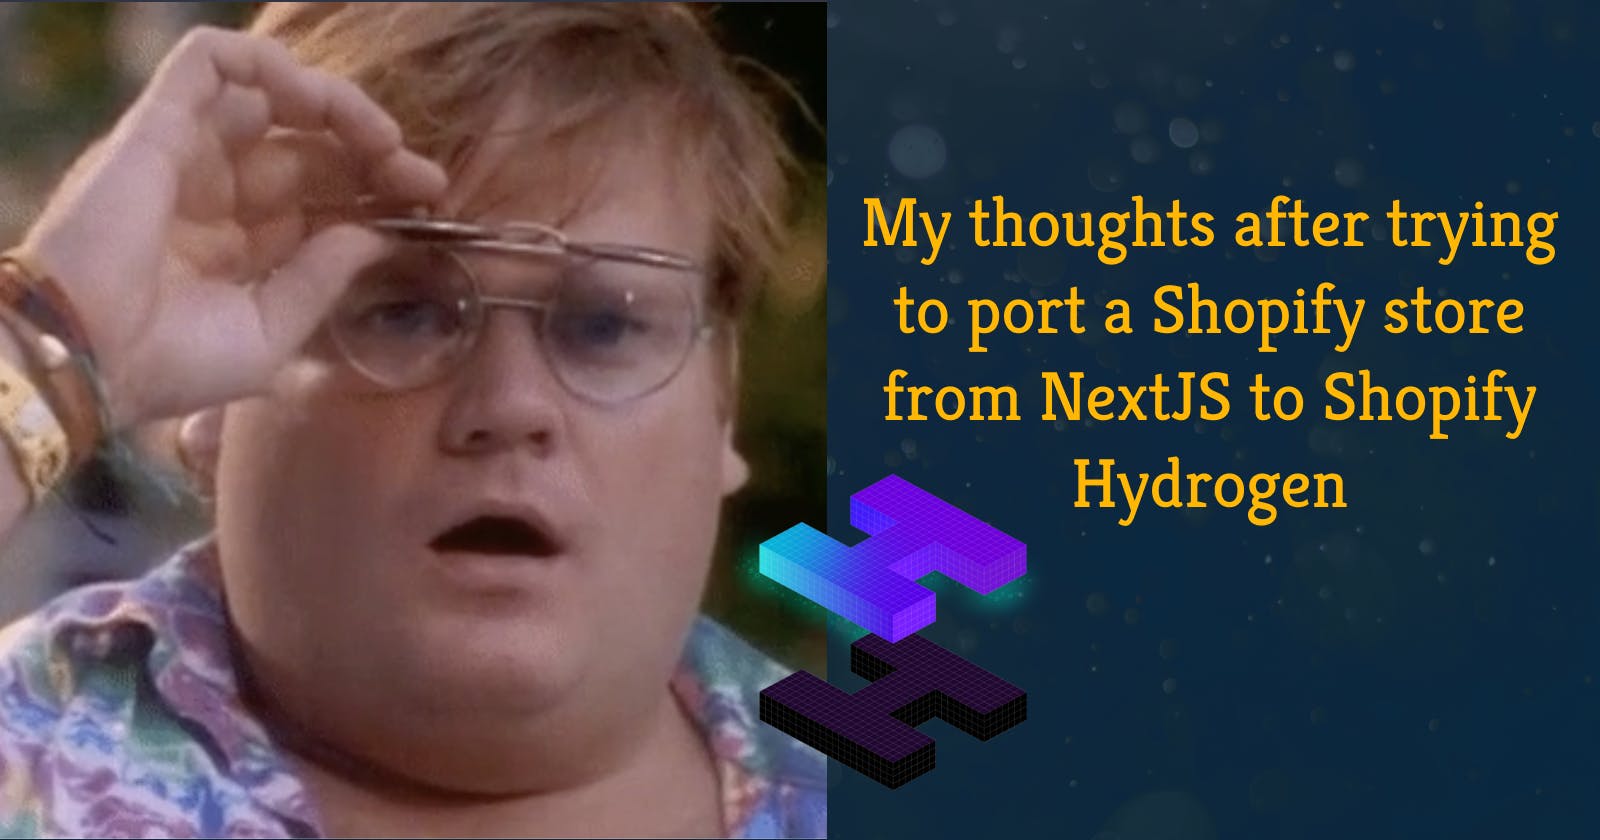 My thoughts after trying to port a Shopify store from NextJS to Shopify Hydrogen